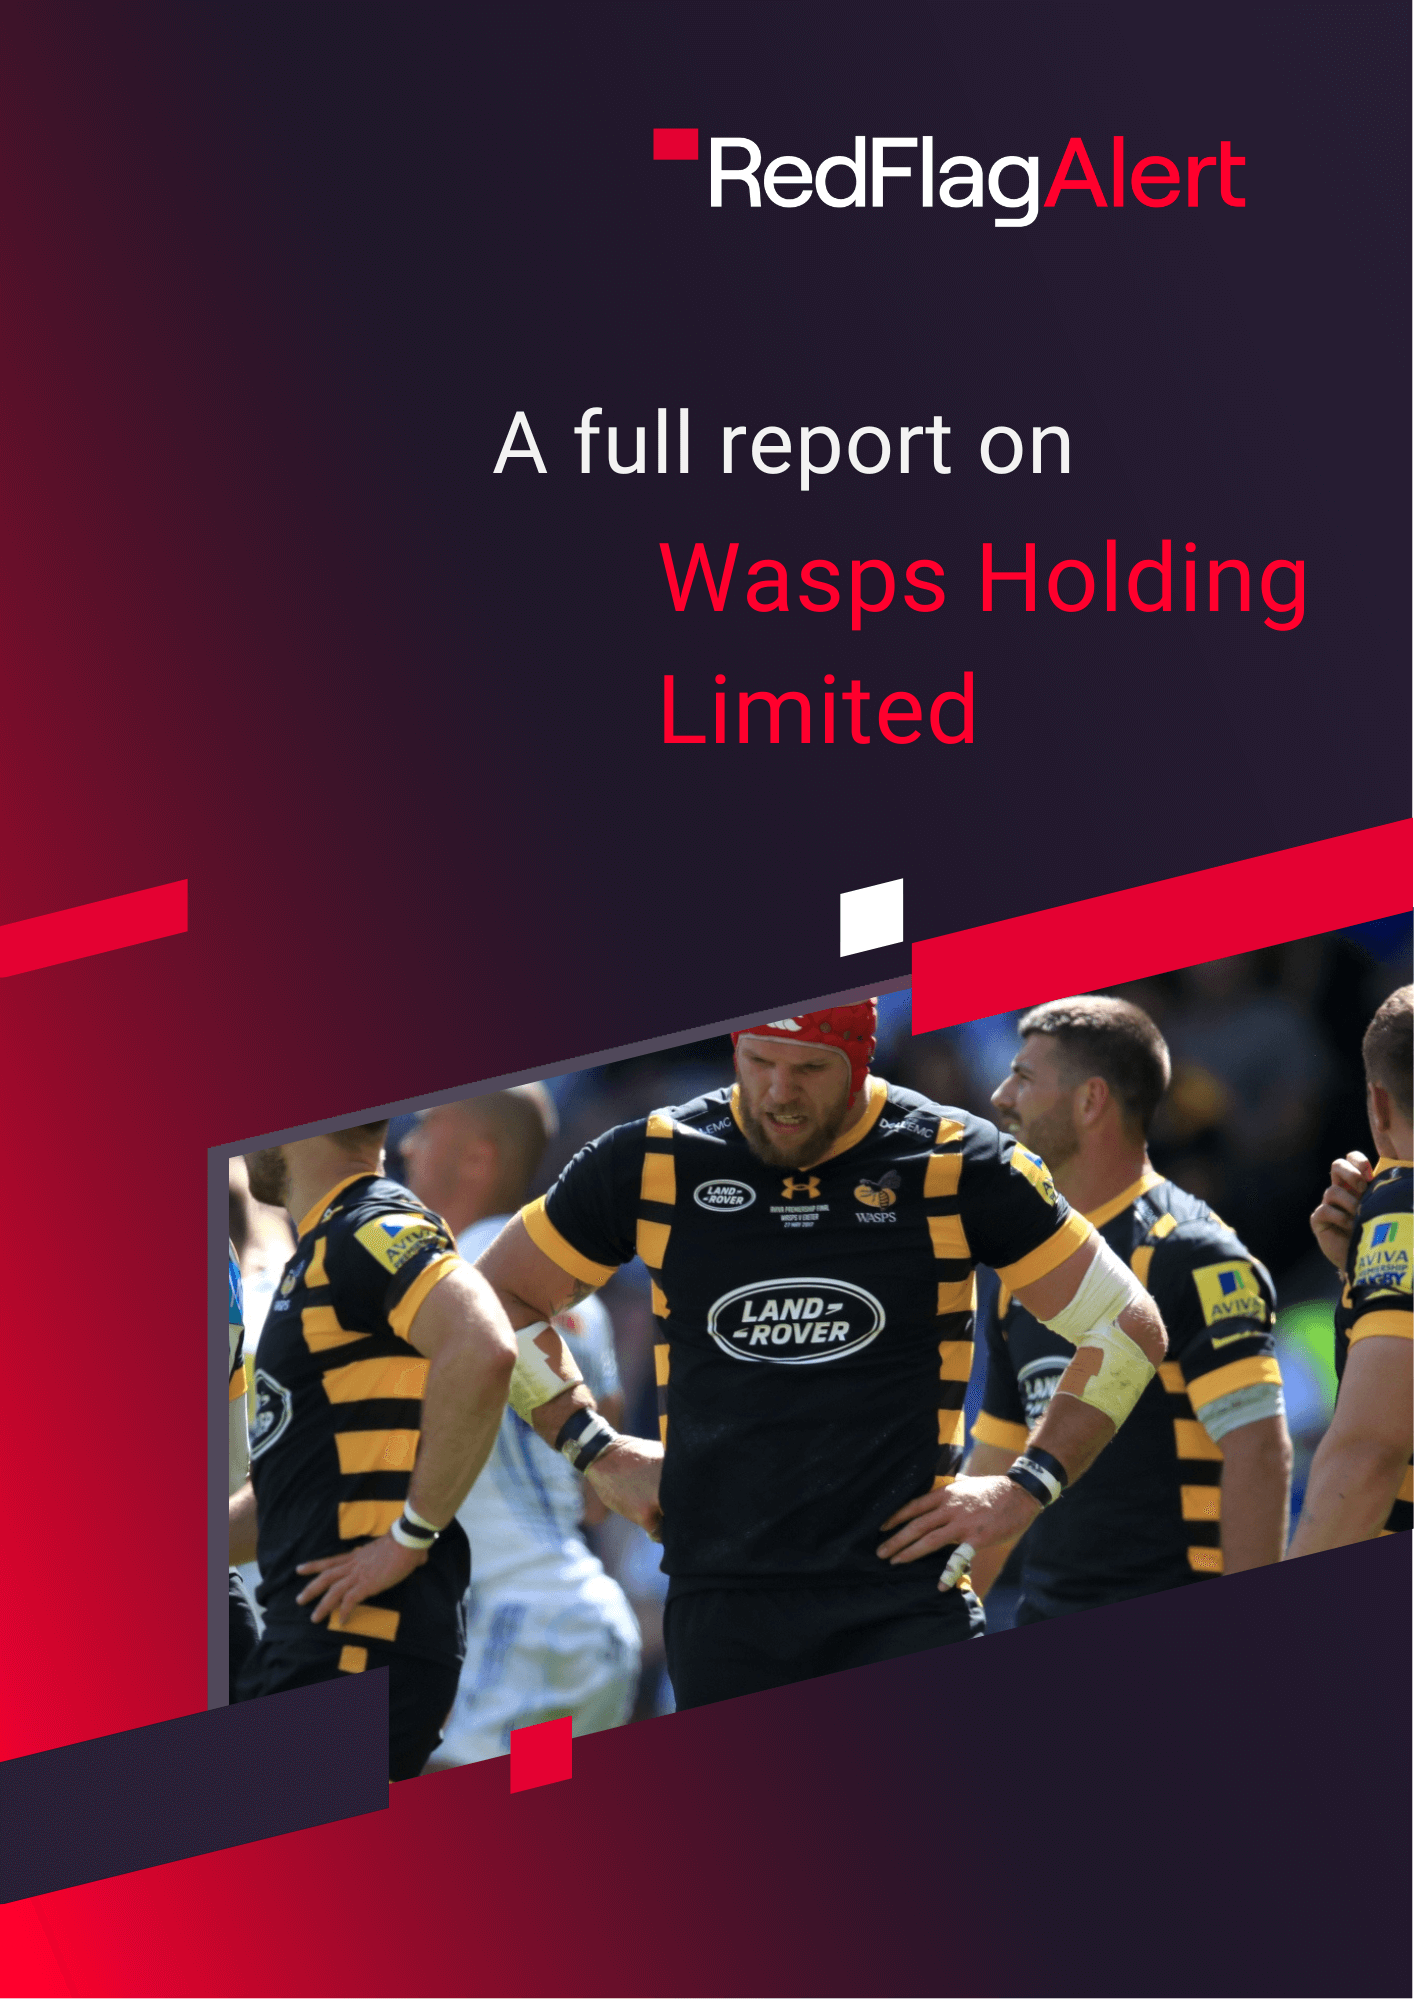 Wasps Holding Limited